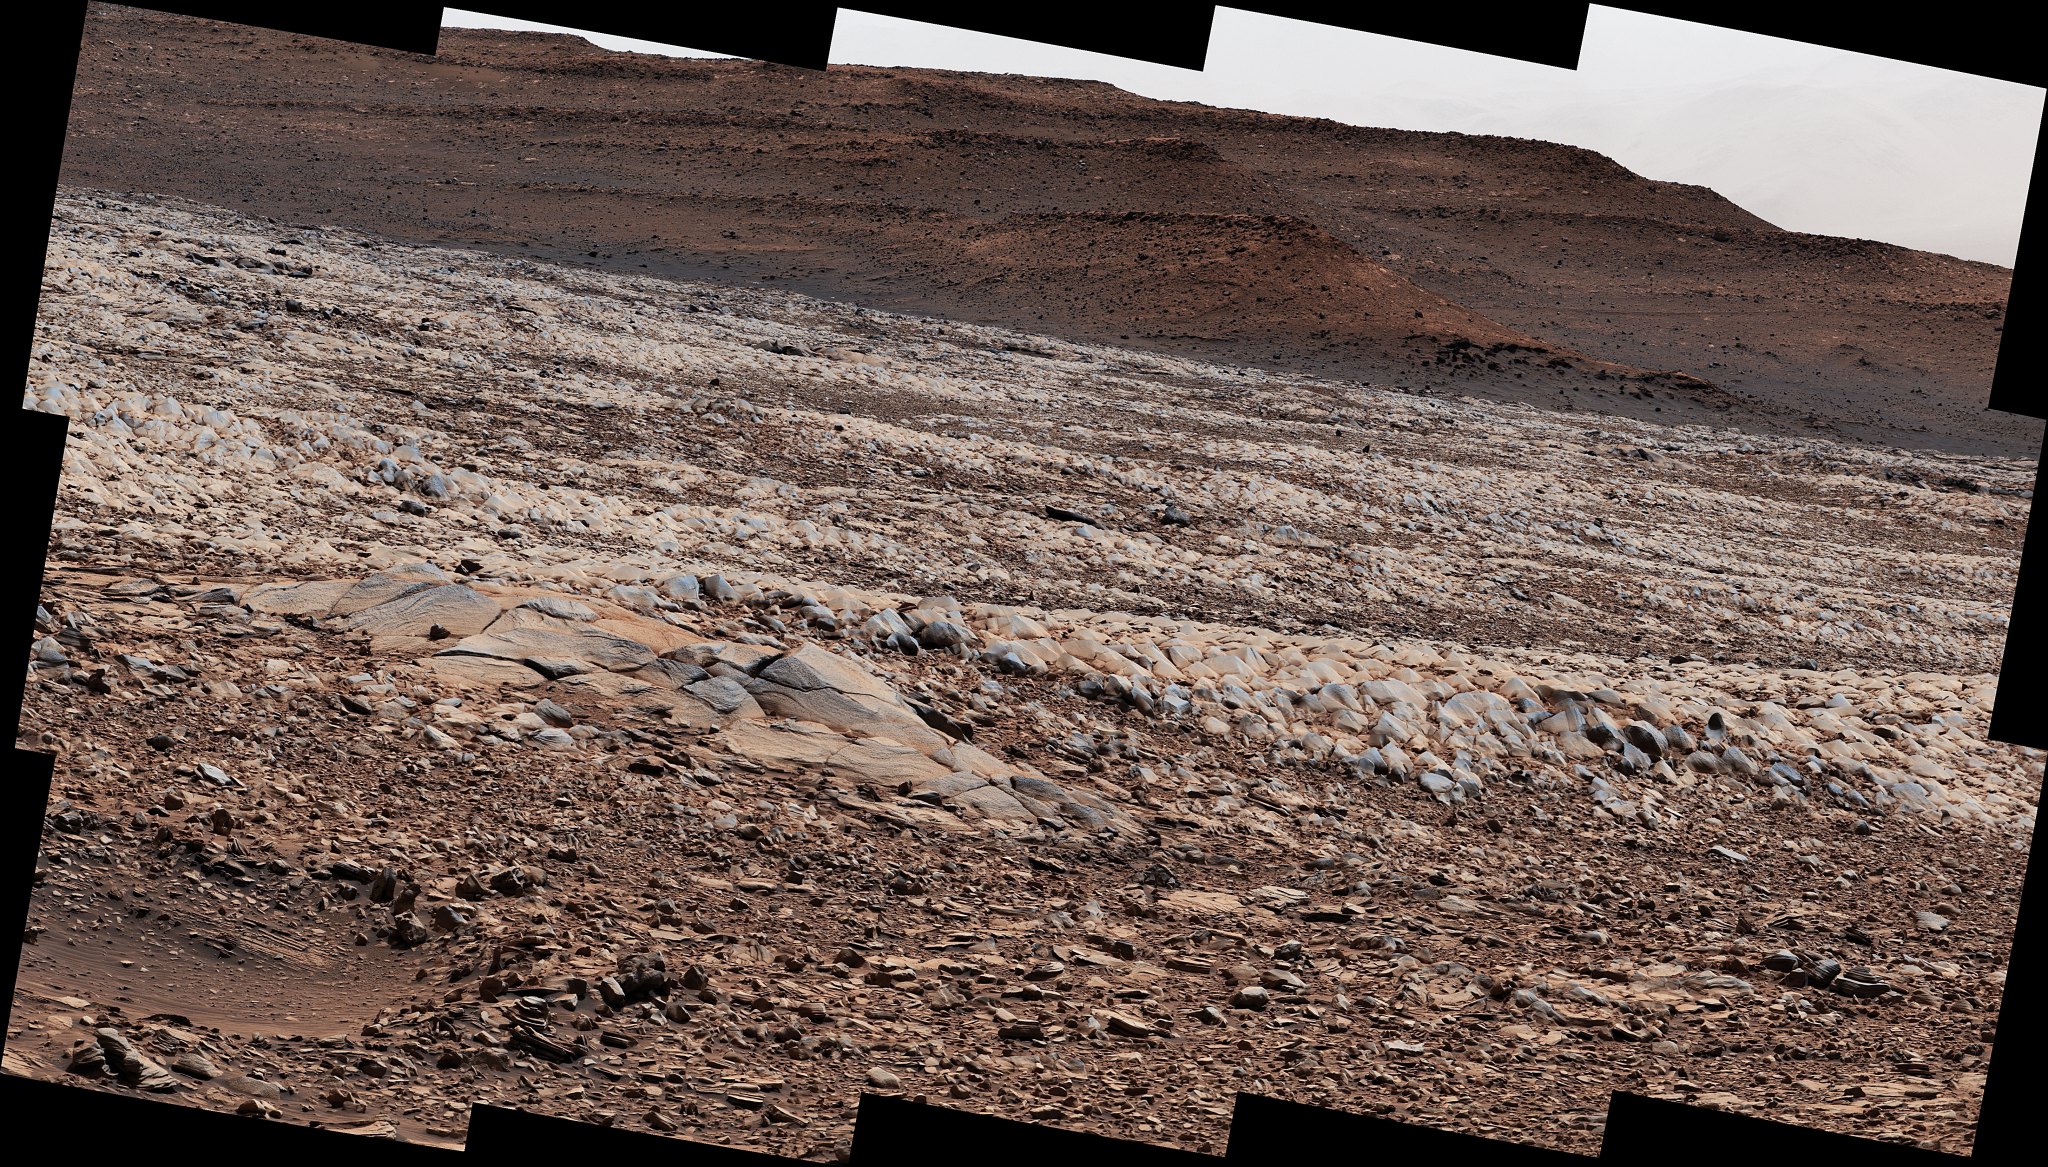 NASA’s Curiosity Mars rover used its Mast Camera, or Mastcam, to survey these wind-sharpened rocks, called ventifacts, on March 15, 2022, the 3,415th Martian day, or sol, of the mission.